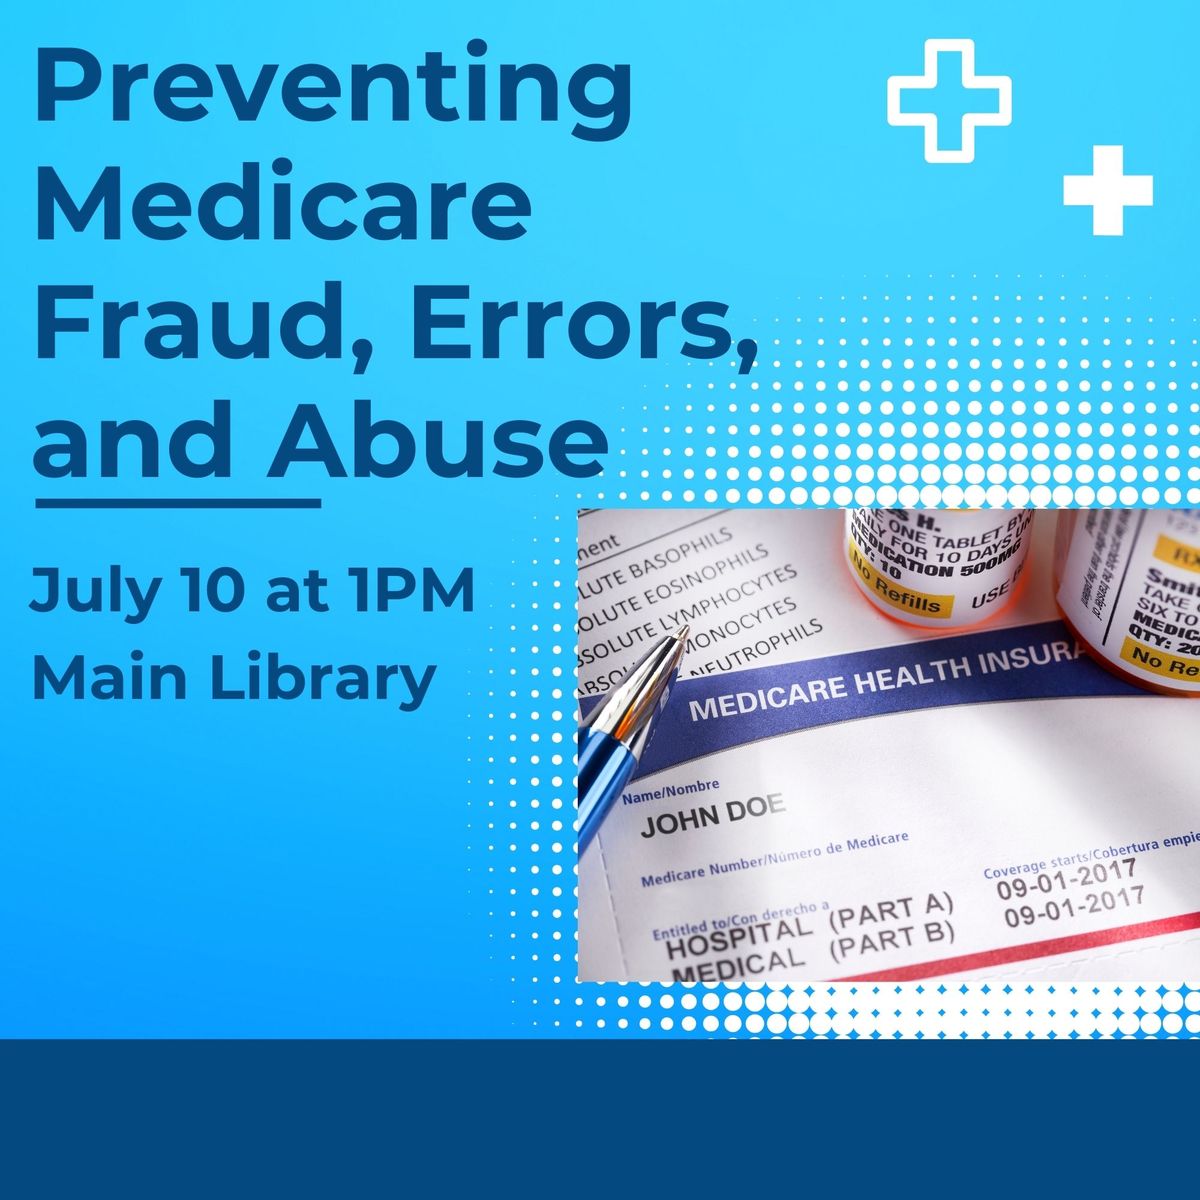 Preventing Medicare Fraud, Errors, and Abuse